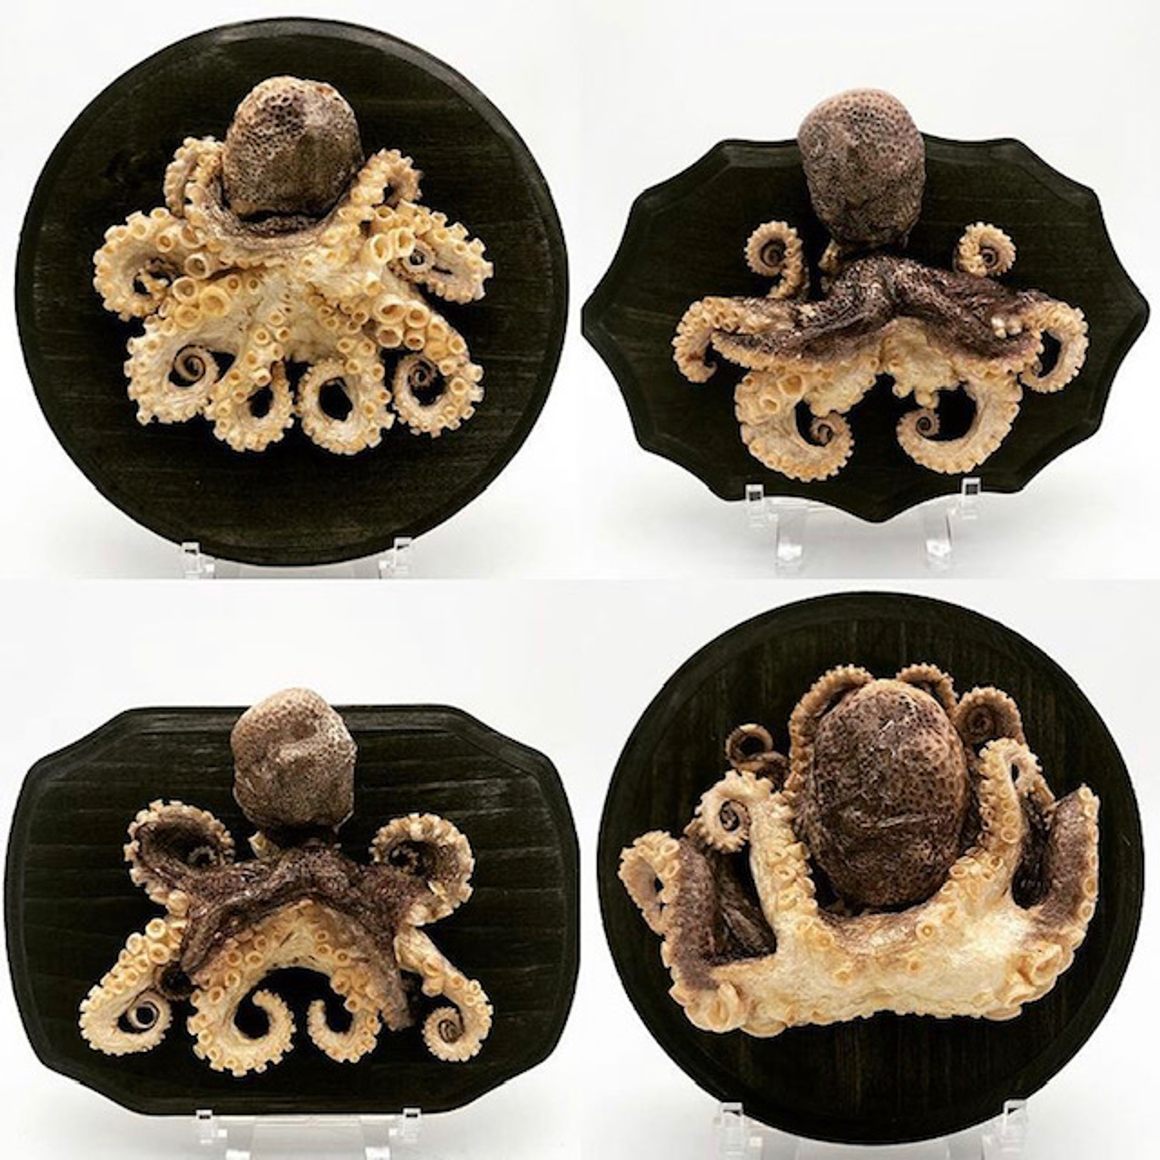 Samples of octopus taxidermy.